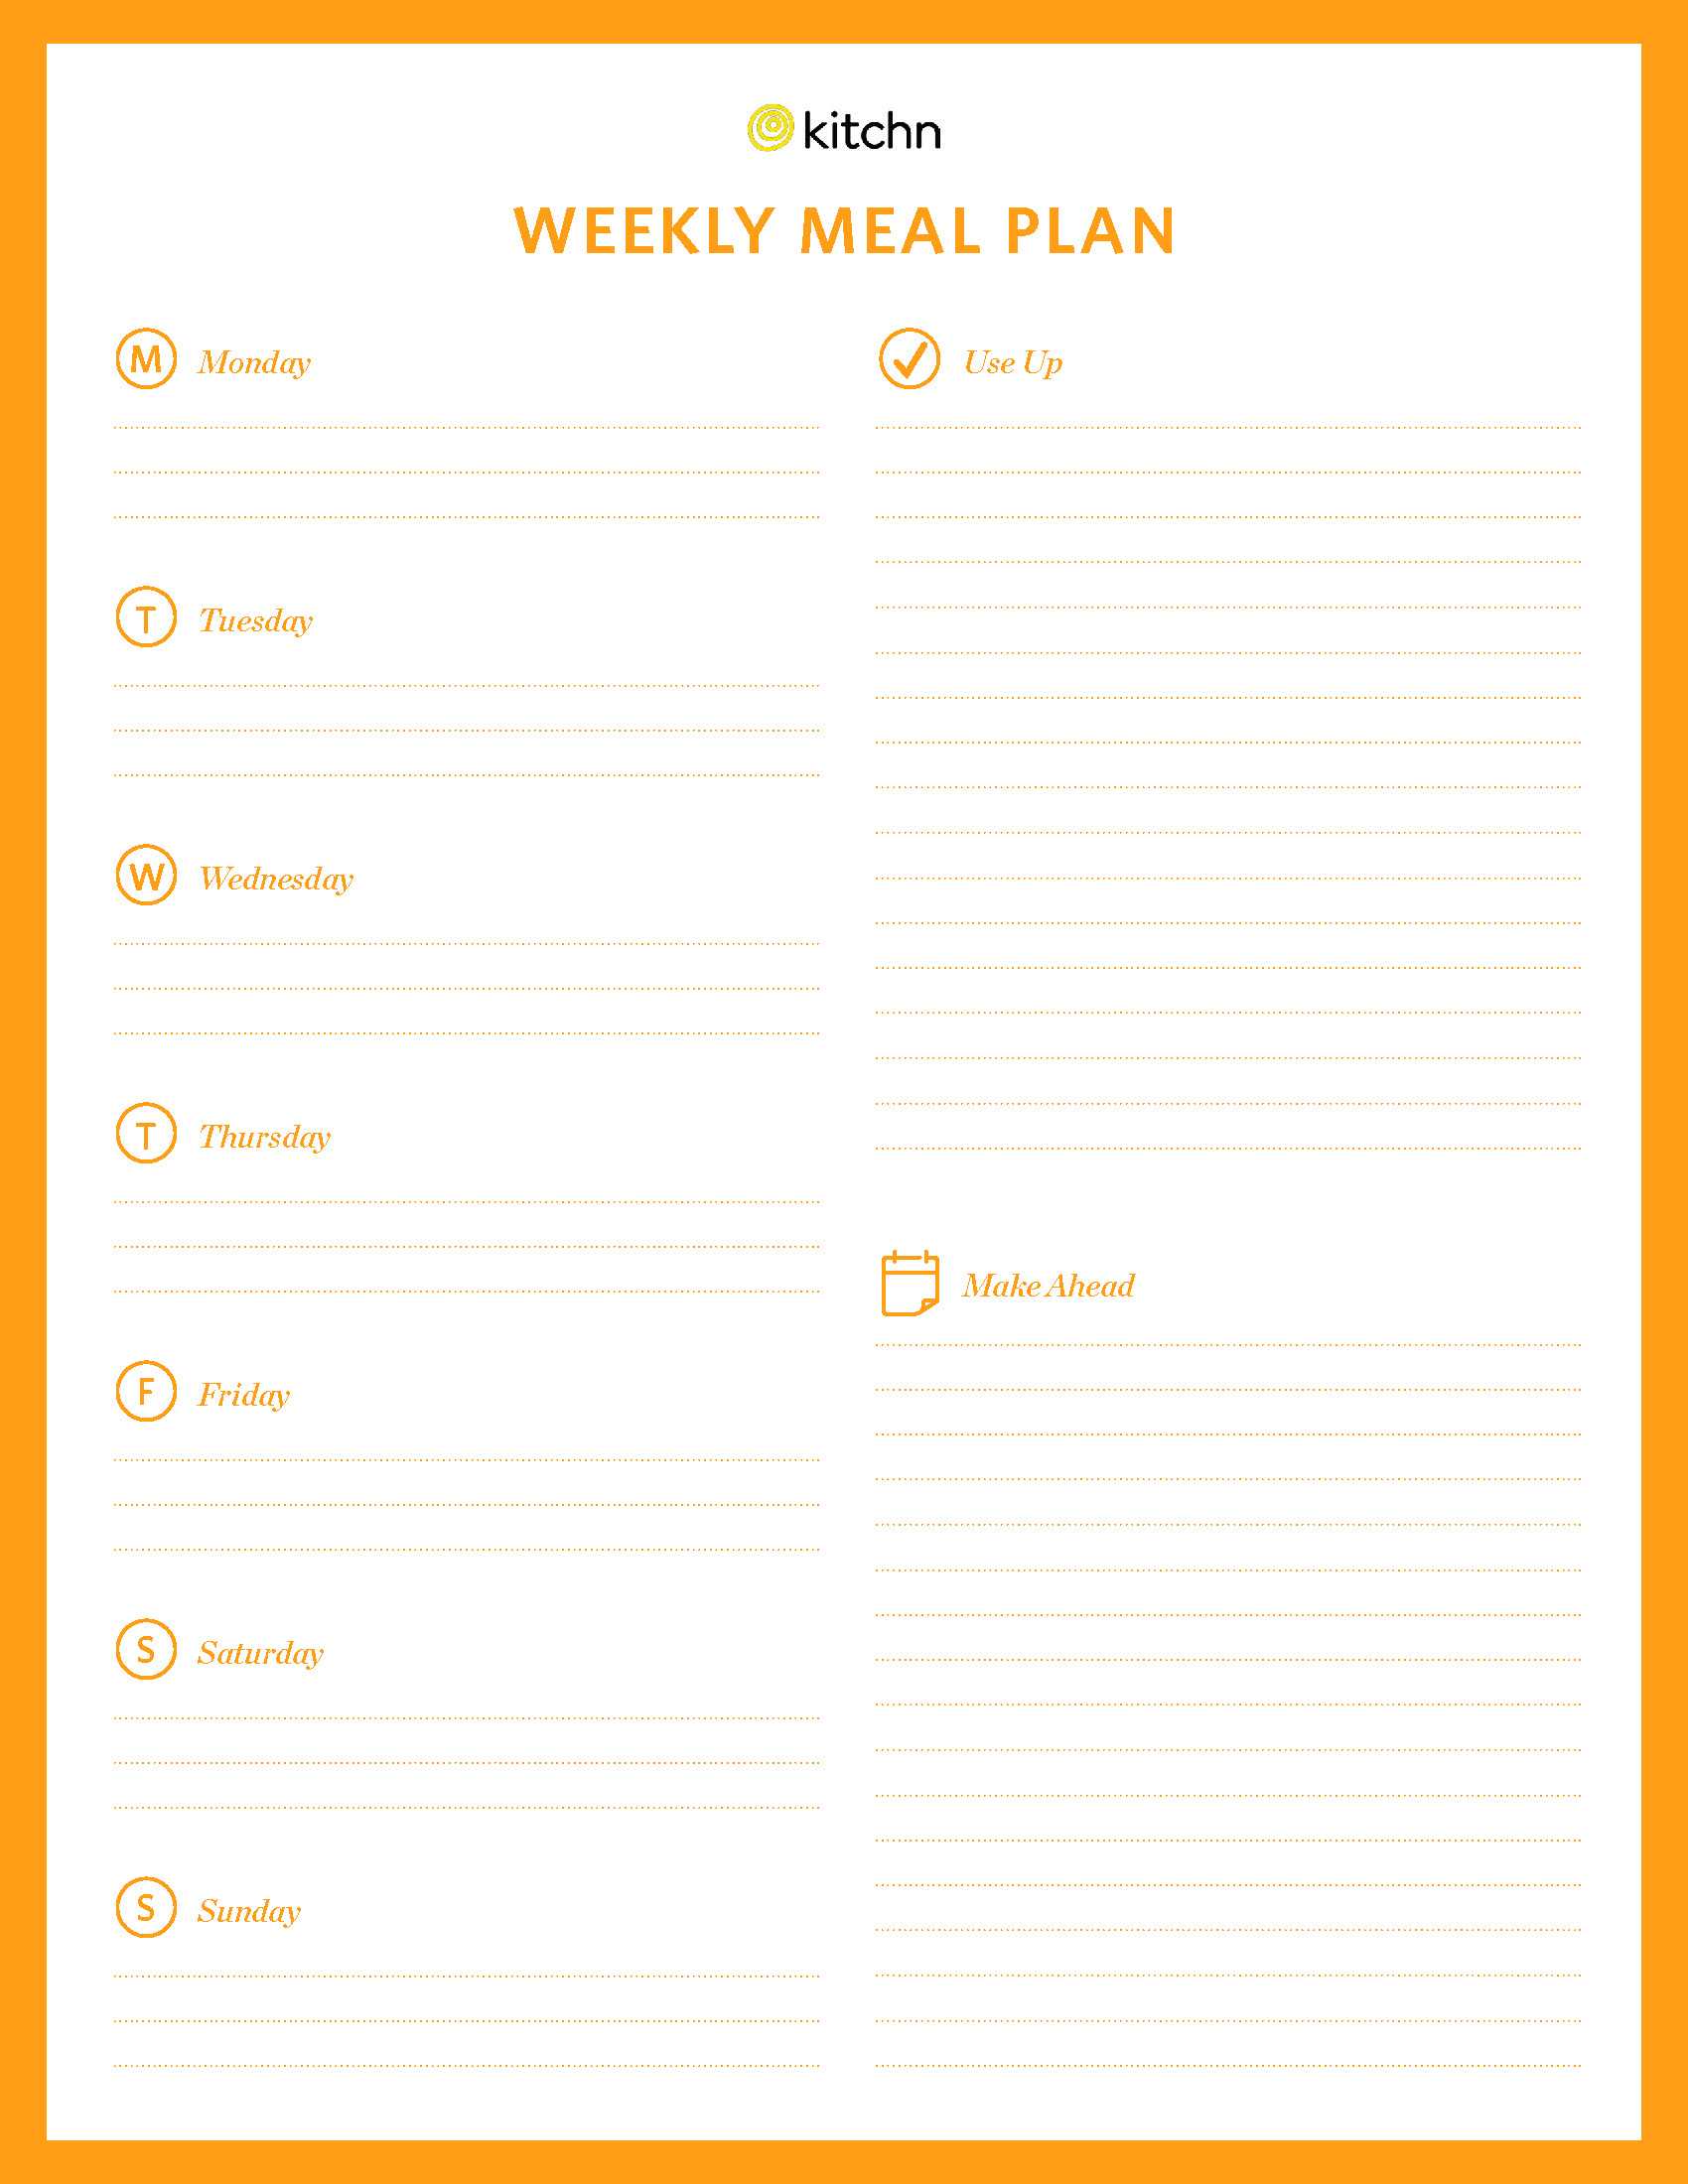 Kitchn's Meal Plan Template | Kitchn Inside Blank Meal Plan Template